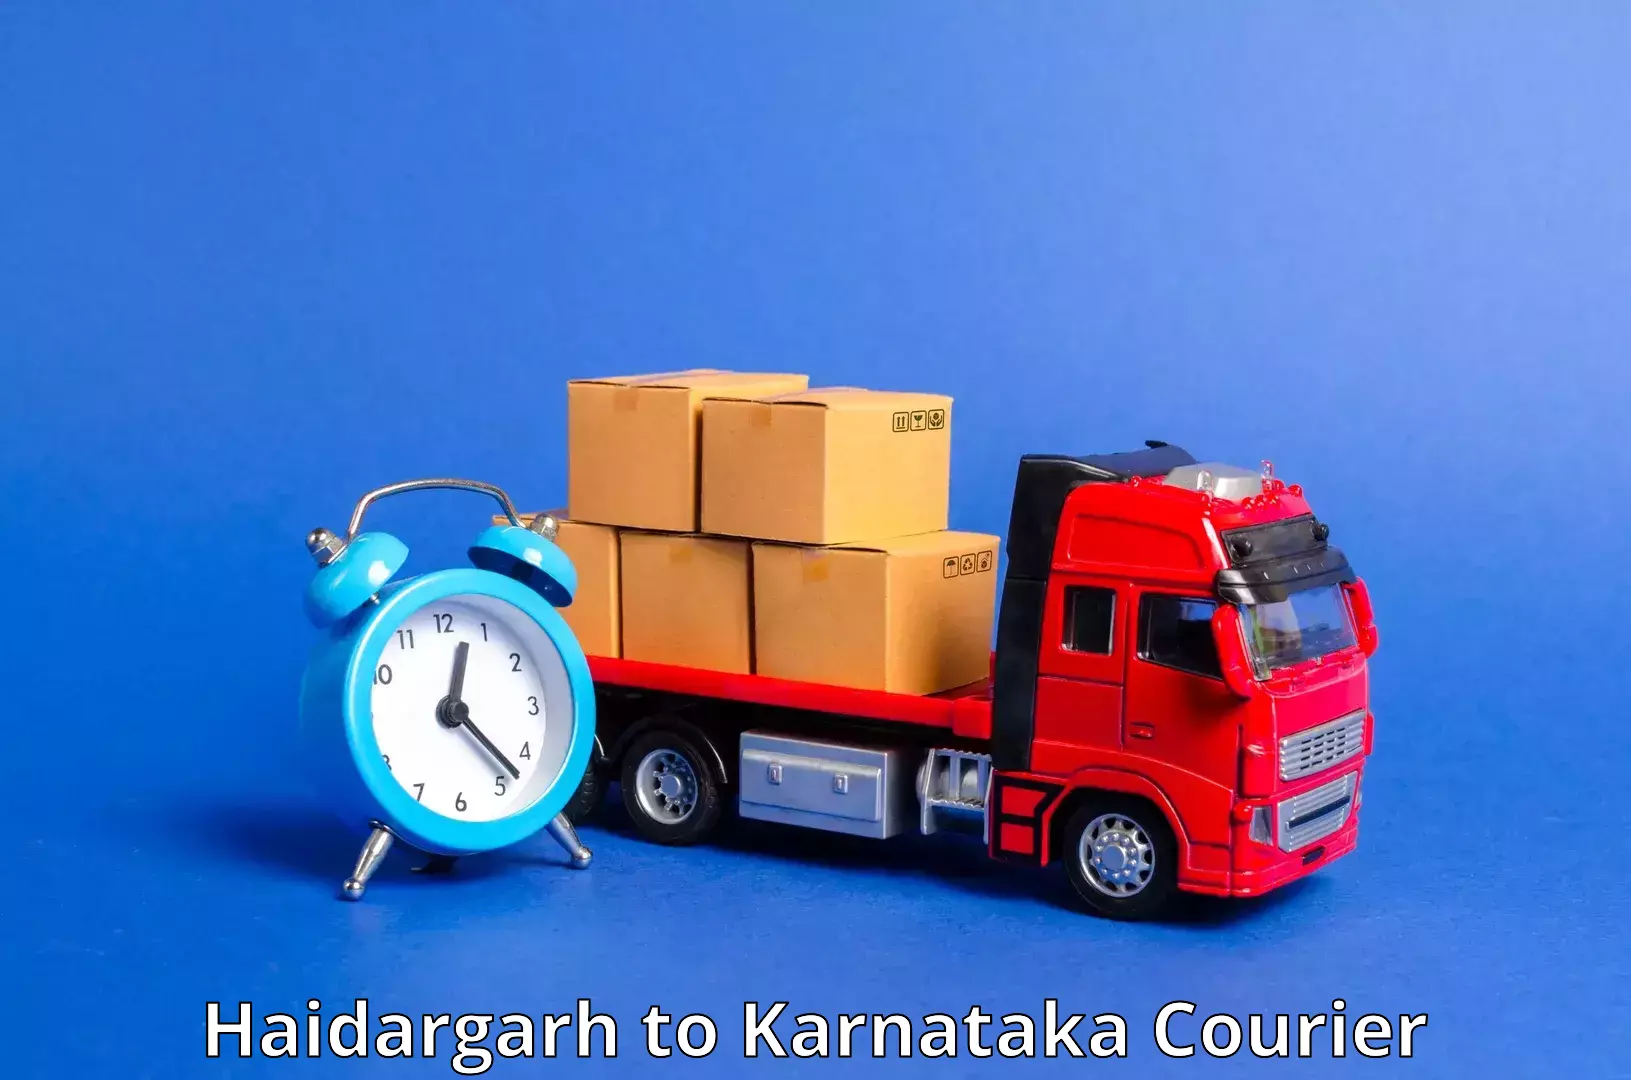 Express package delivery Haidargarh to Gurmatkal